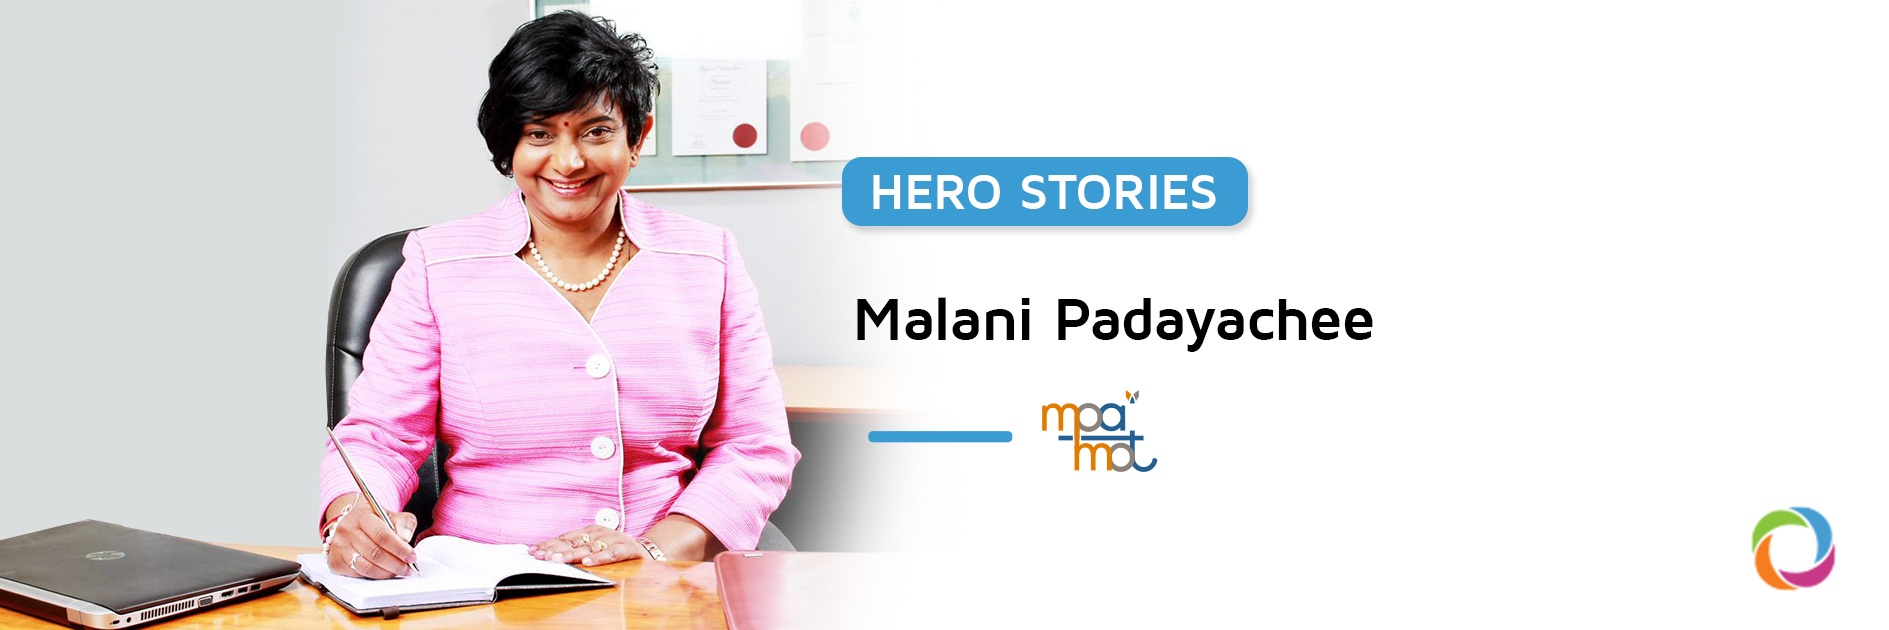 Hero Stories | Malani Padayachee: A CEO championing diversity as a key factor in shaping universal engineering solutions